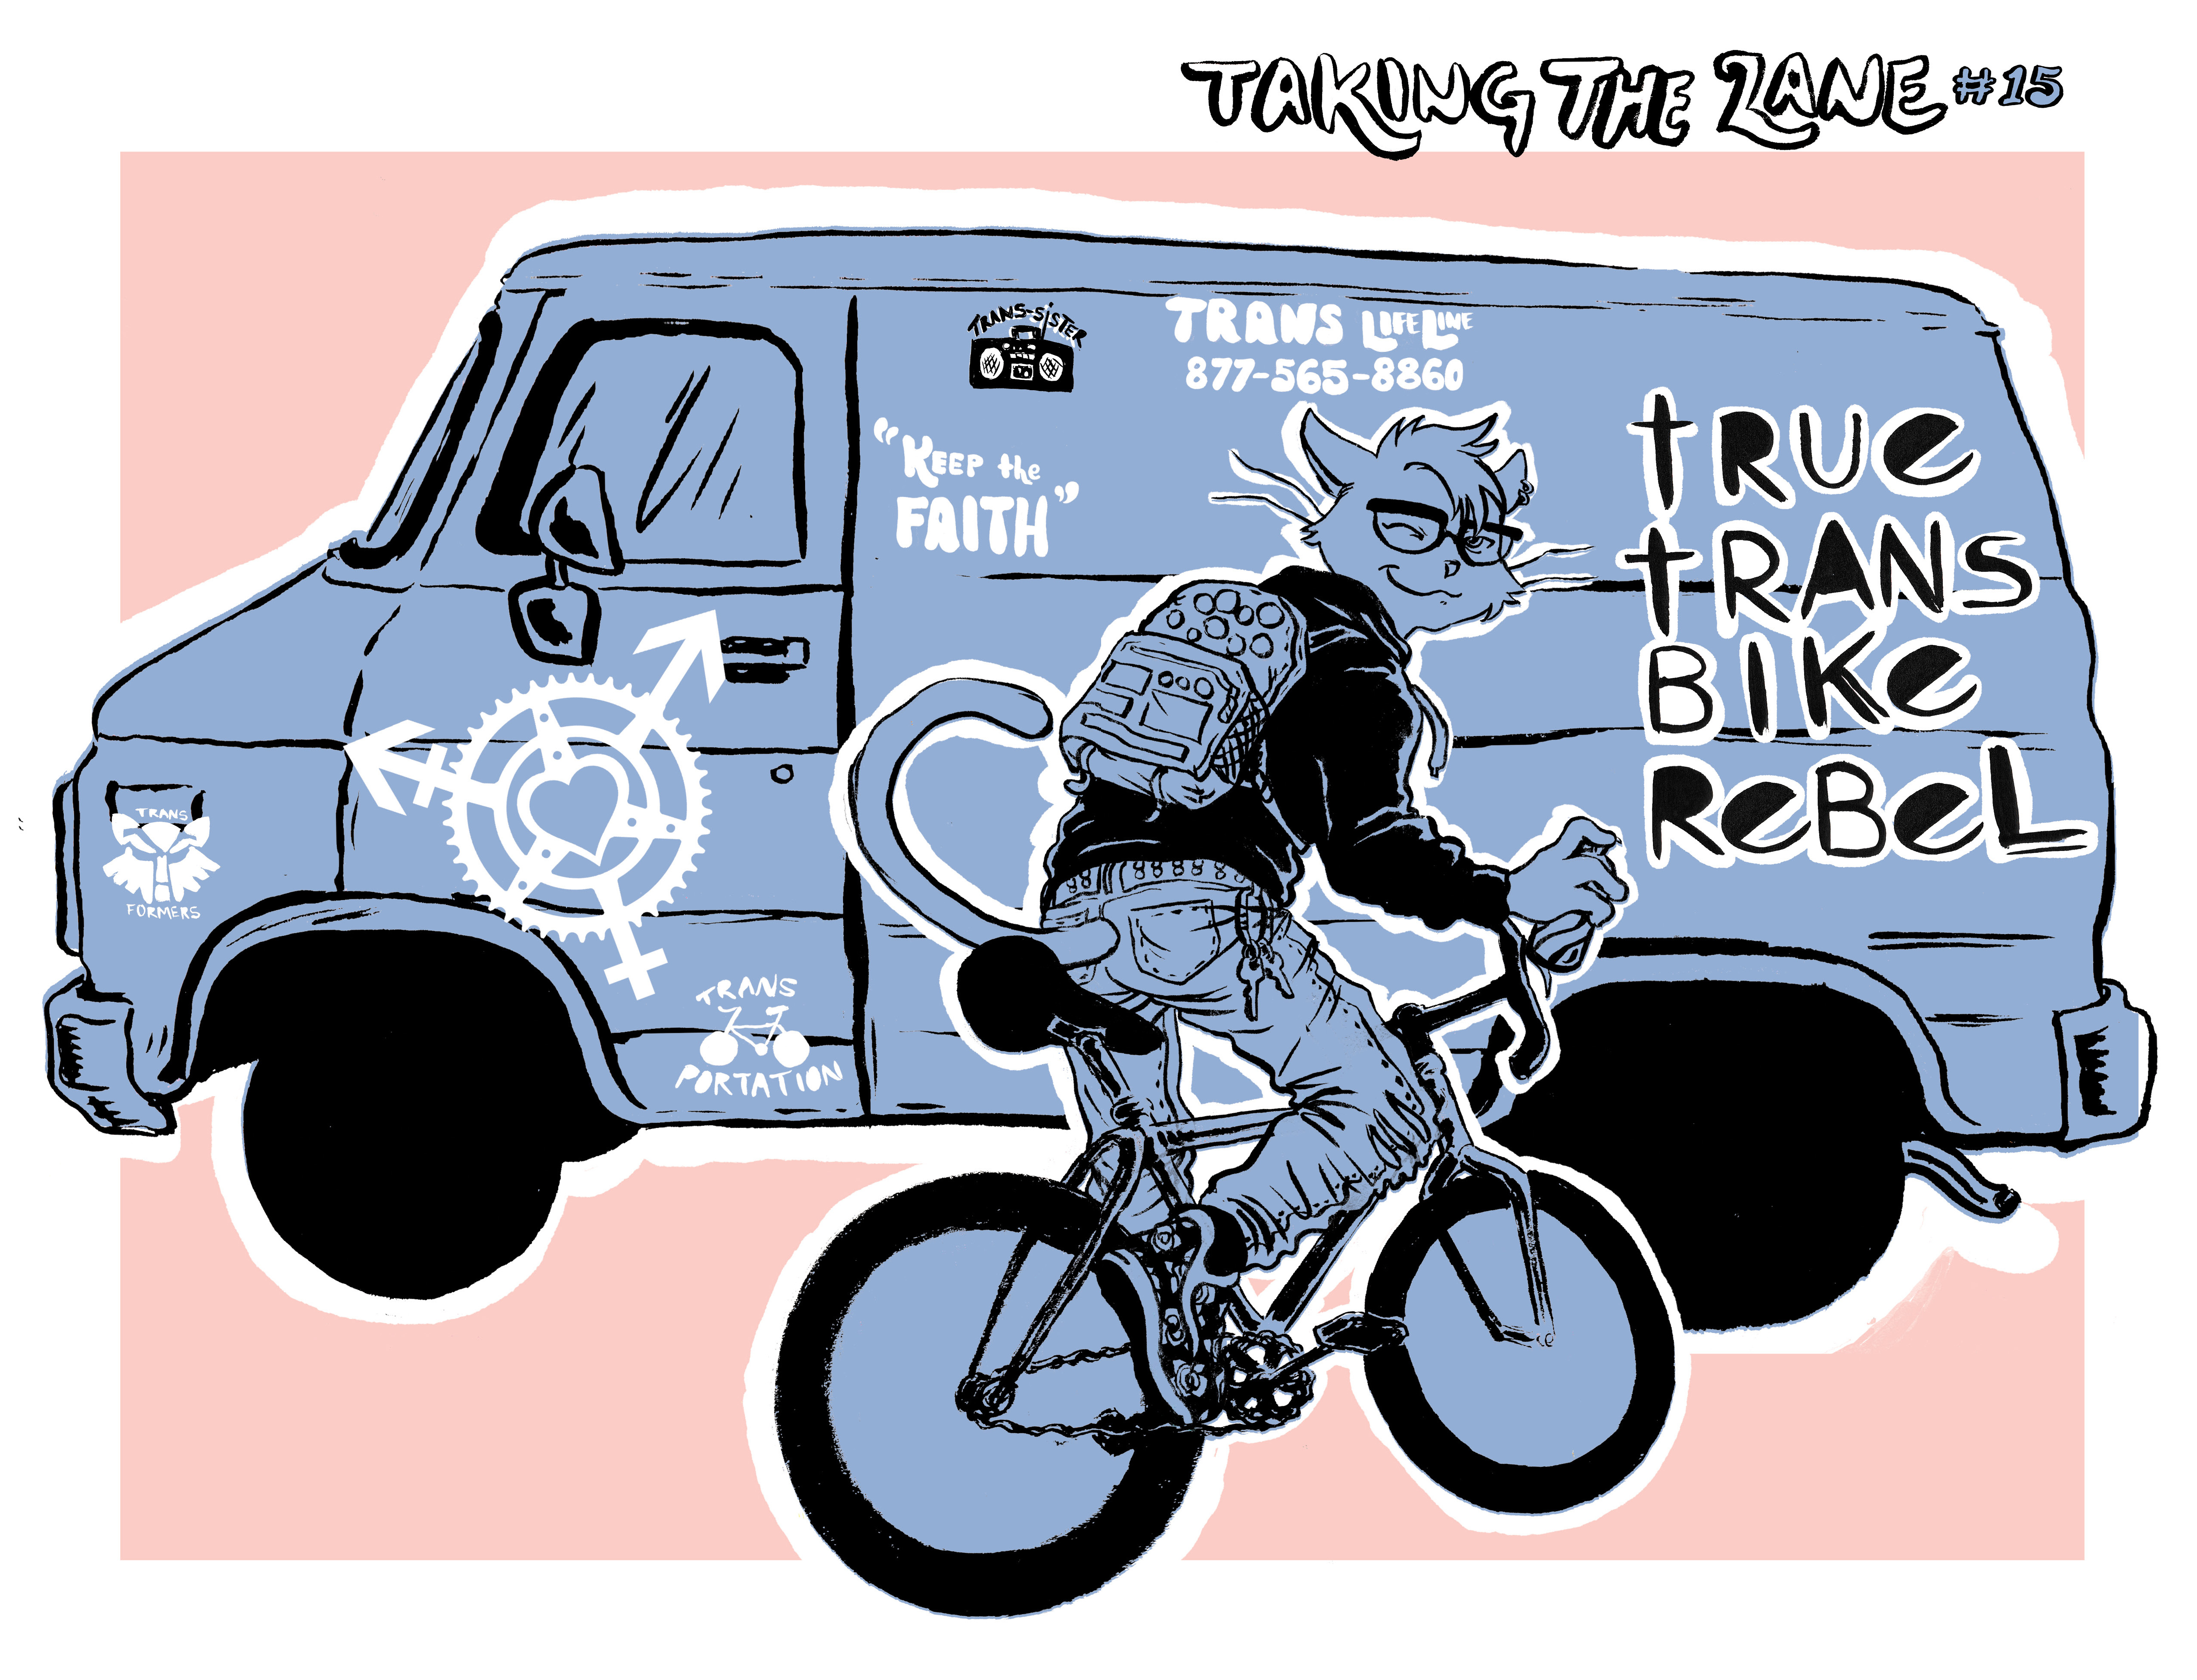 Cover of True Trans Bike Rebel, which features a genderfluid cat riding a bicycle in front of a van that has the title of the zine and various positive messages spray-painted onto it.